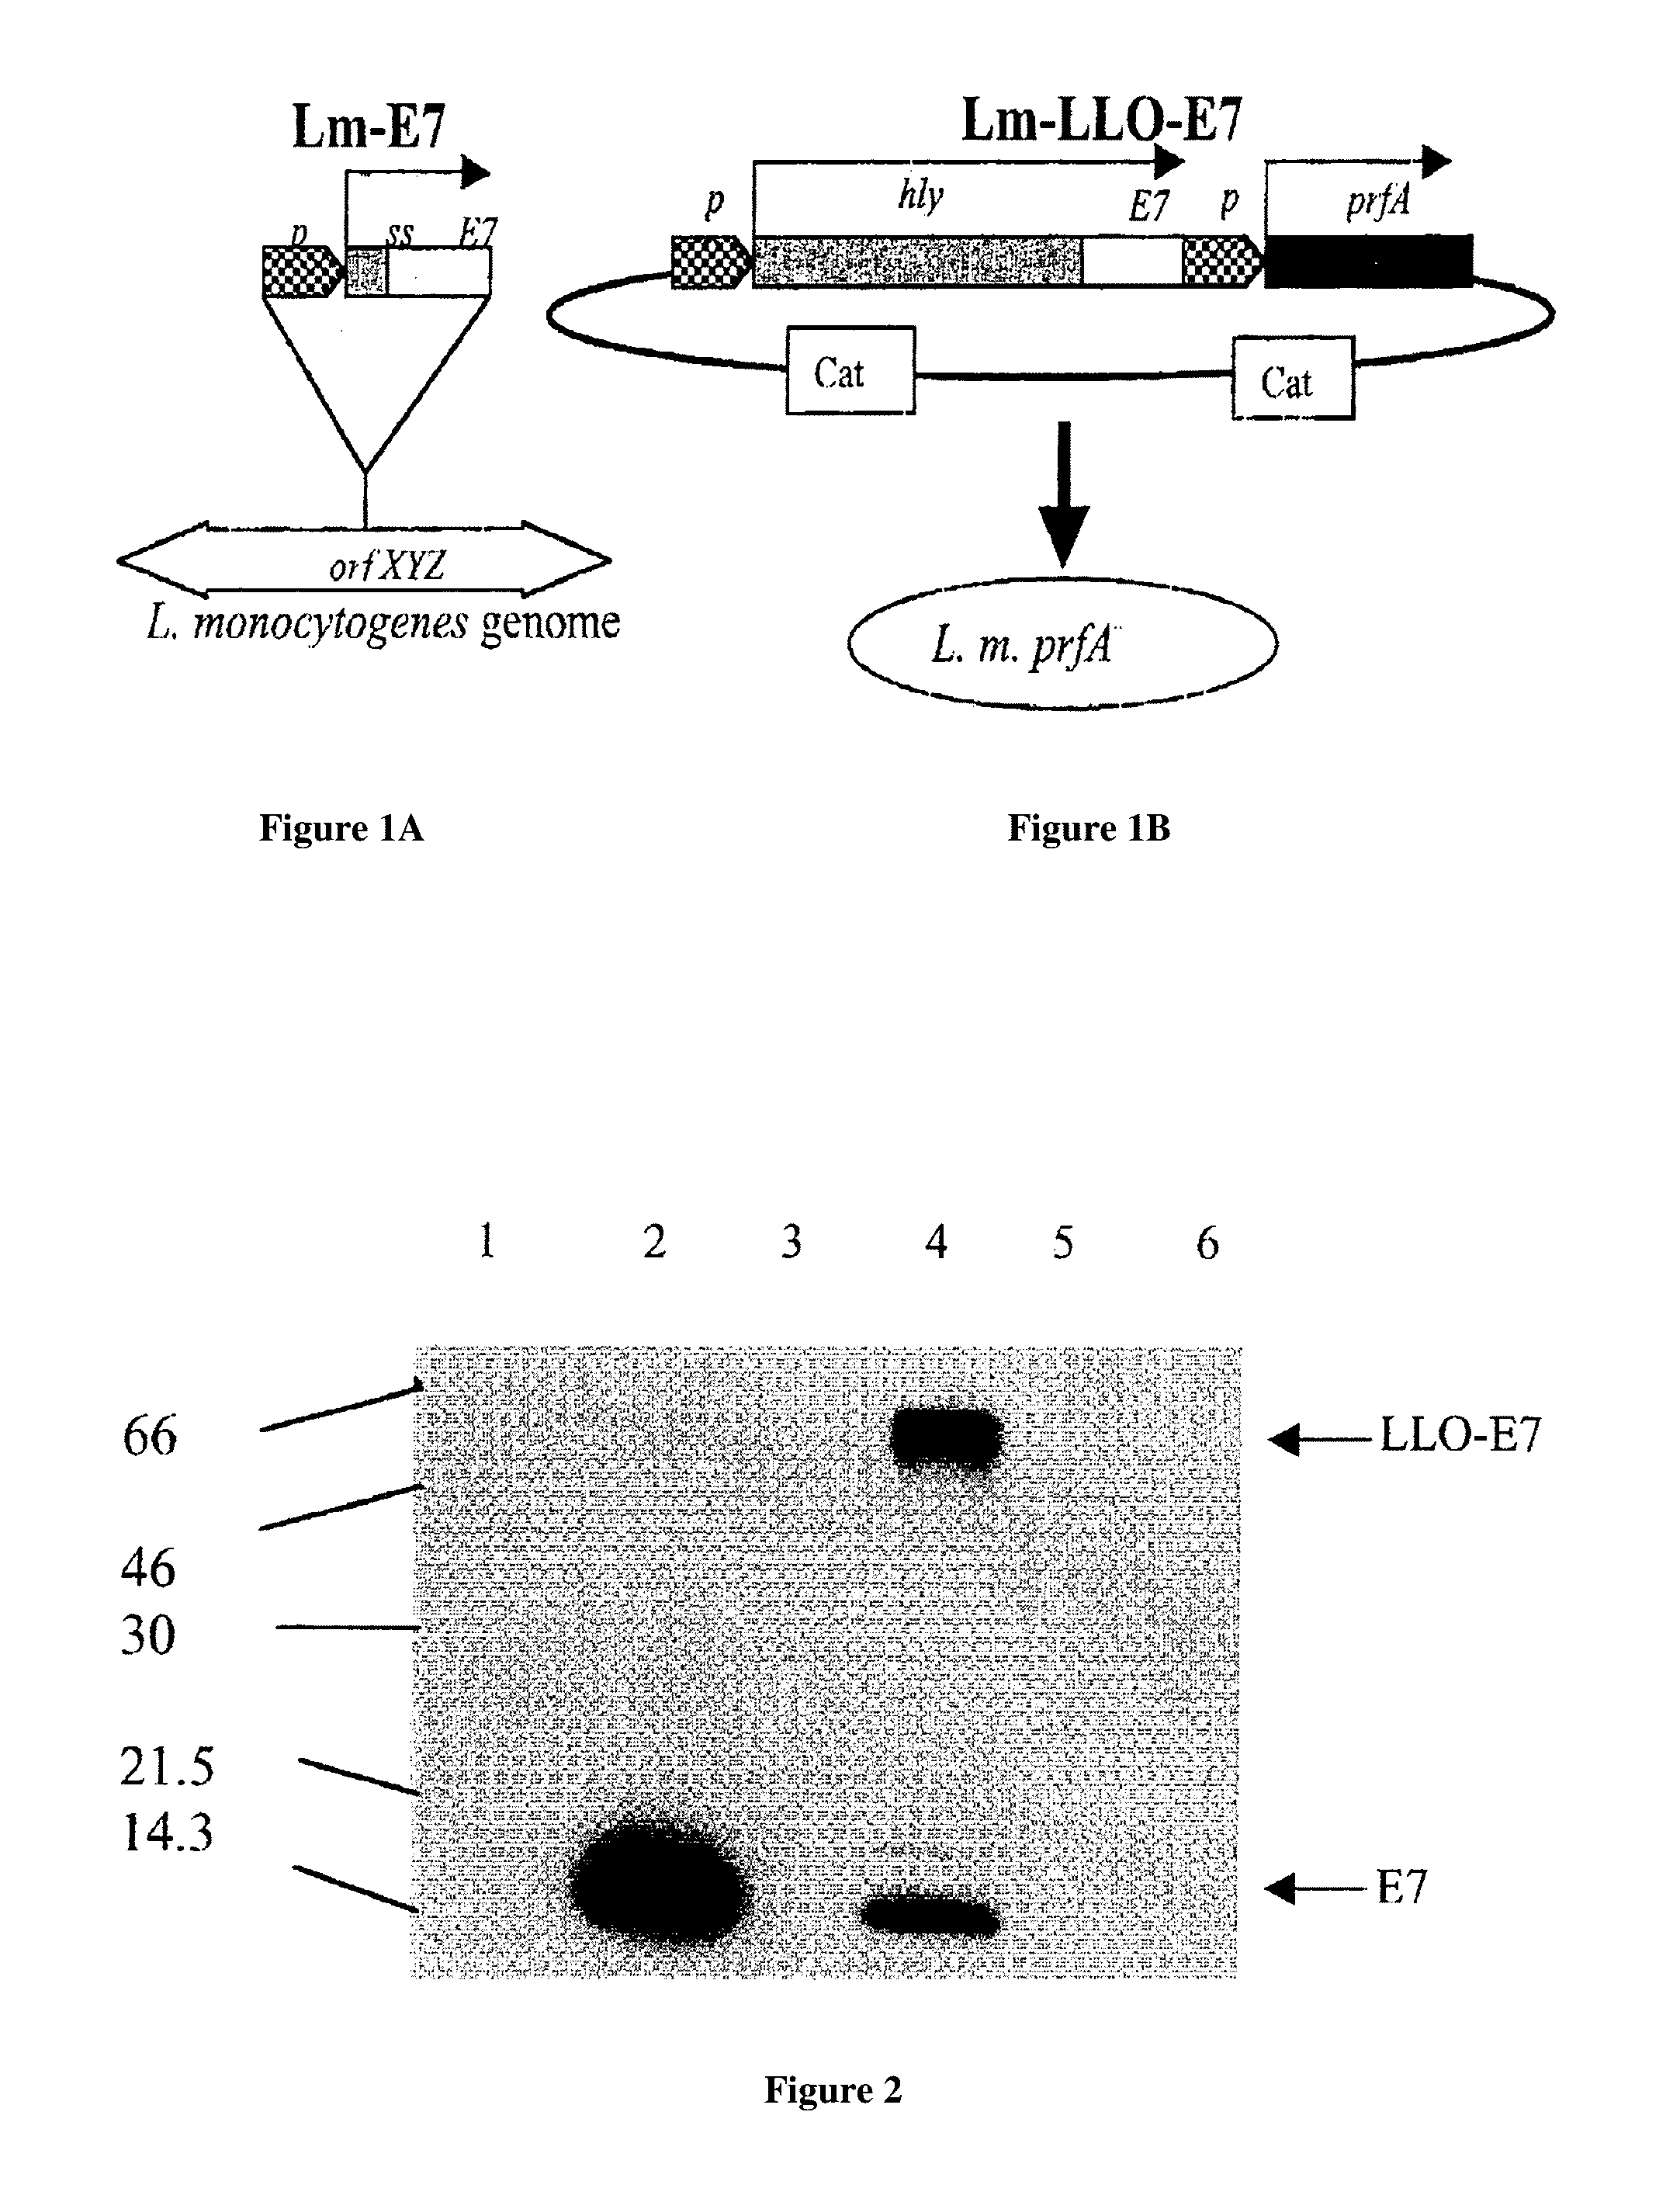 Recombinant listeria vaccine strains and methods of using the same in cancer immunotherapy